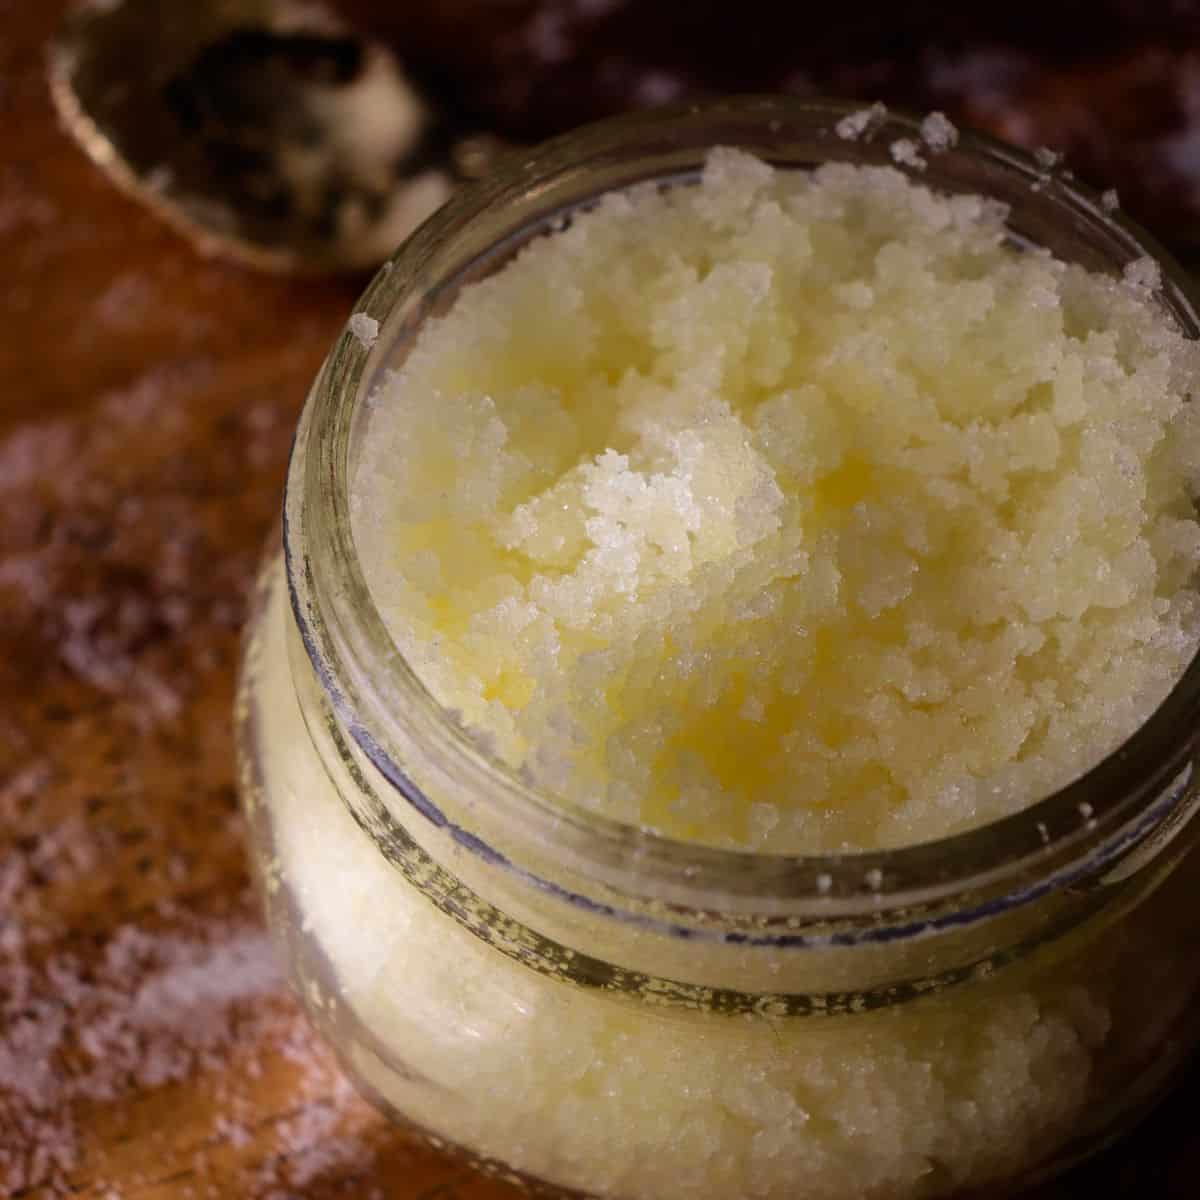 salt scrub with a yellow tint from jojoba oil in a glass jar with a tiny golden spoon nearby